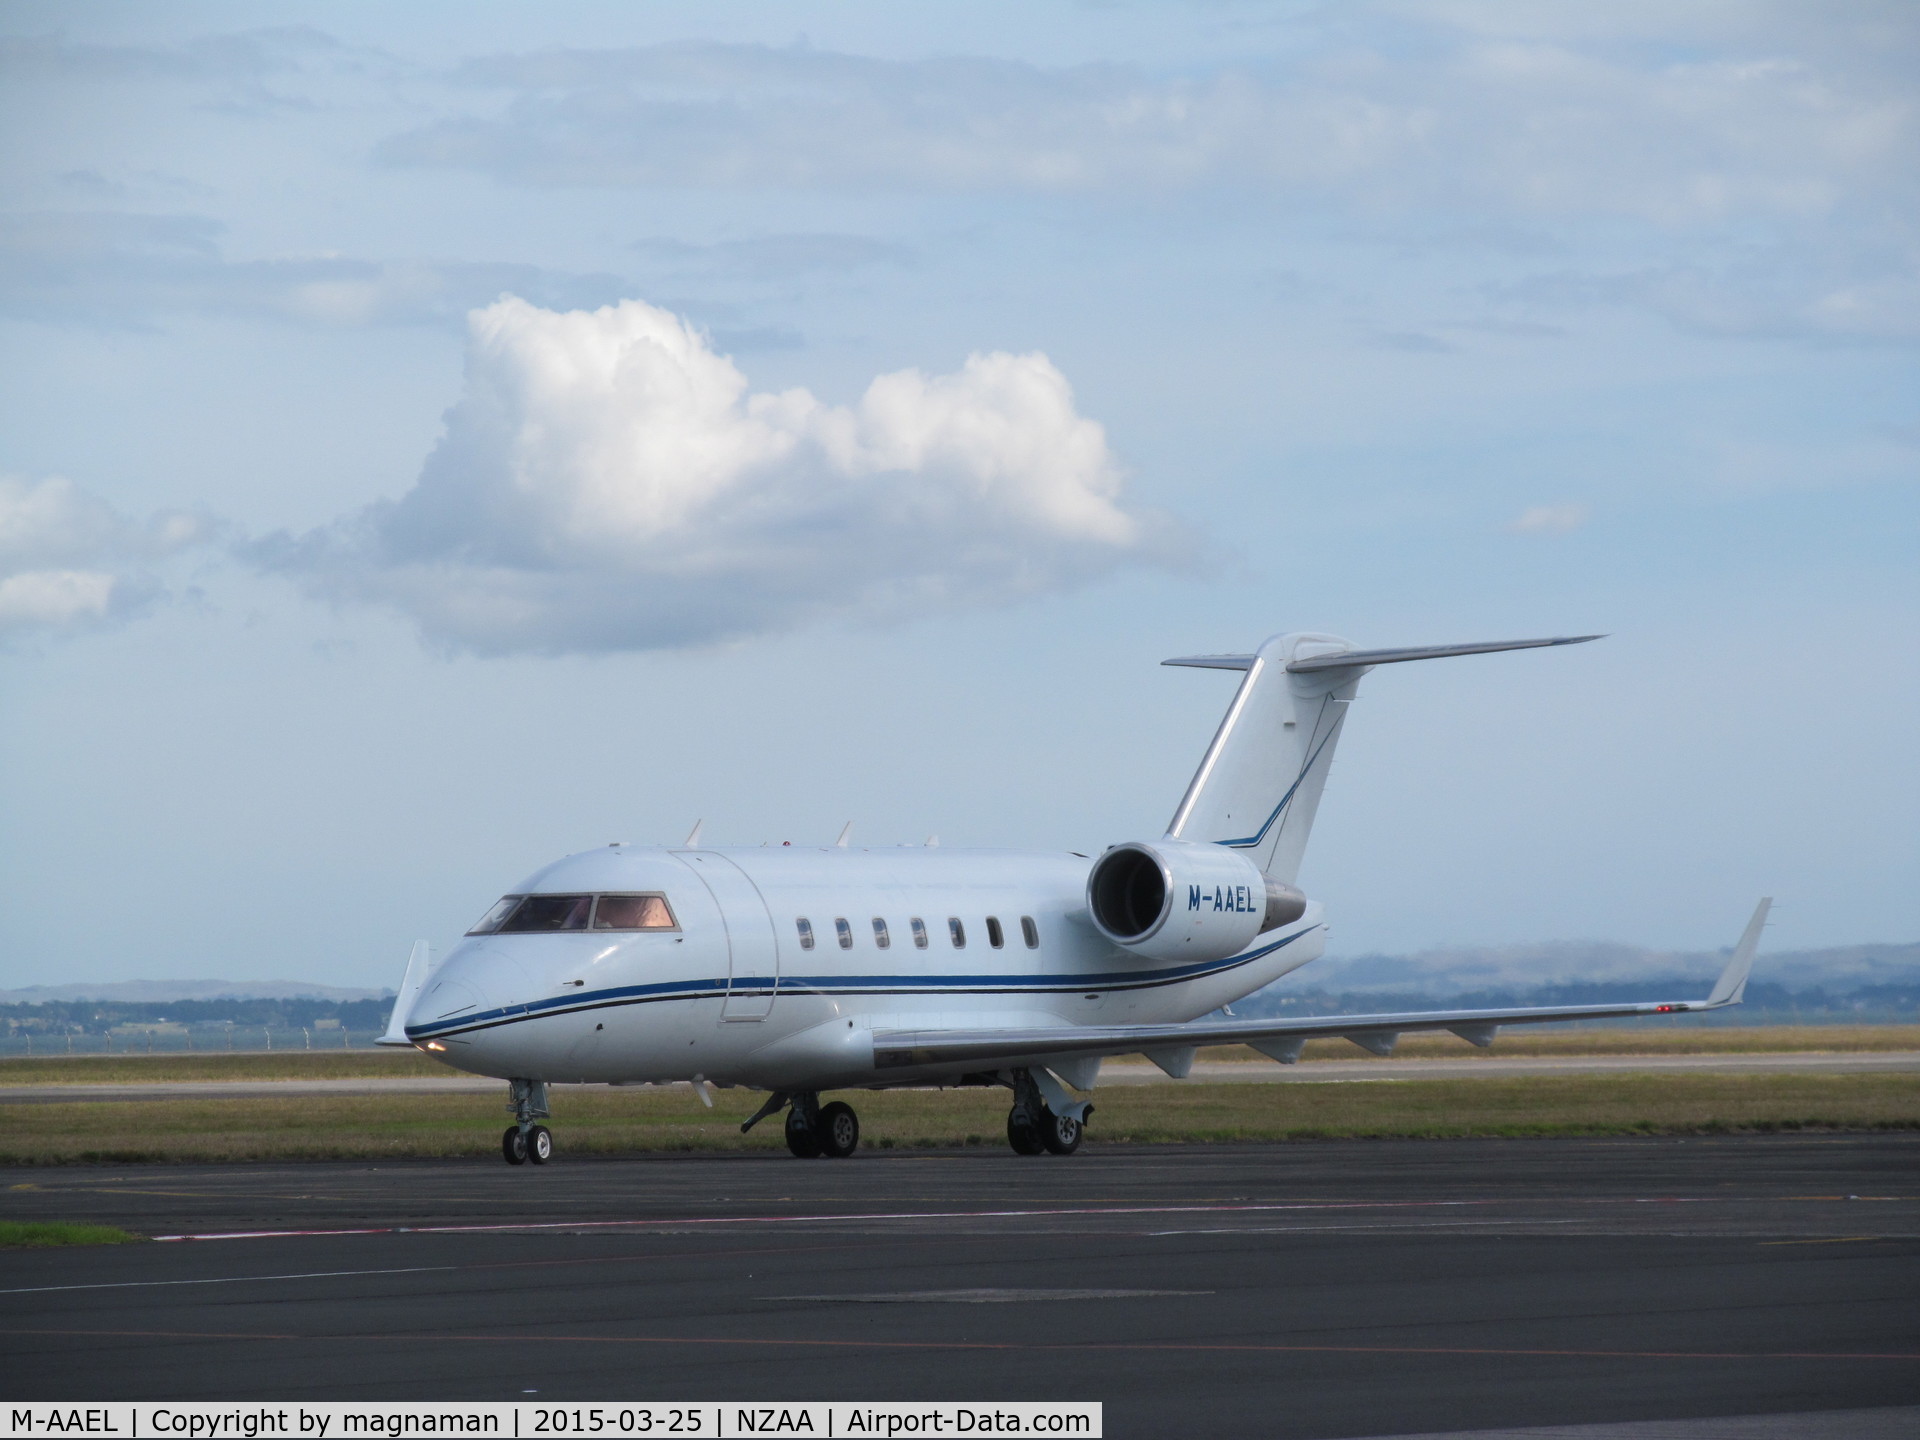 M-AAEL, 2005 Bombardier Challenger 604 (CL-600-2B16) C/N 5604, arriving at AKL this PM